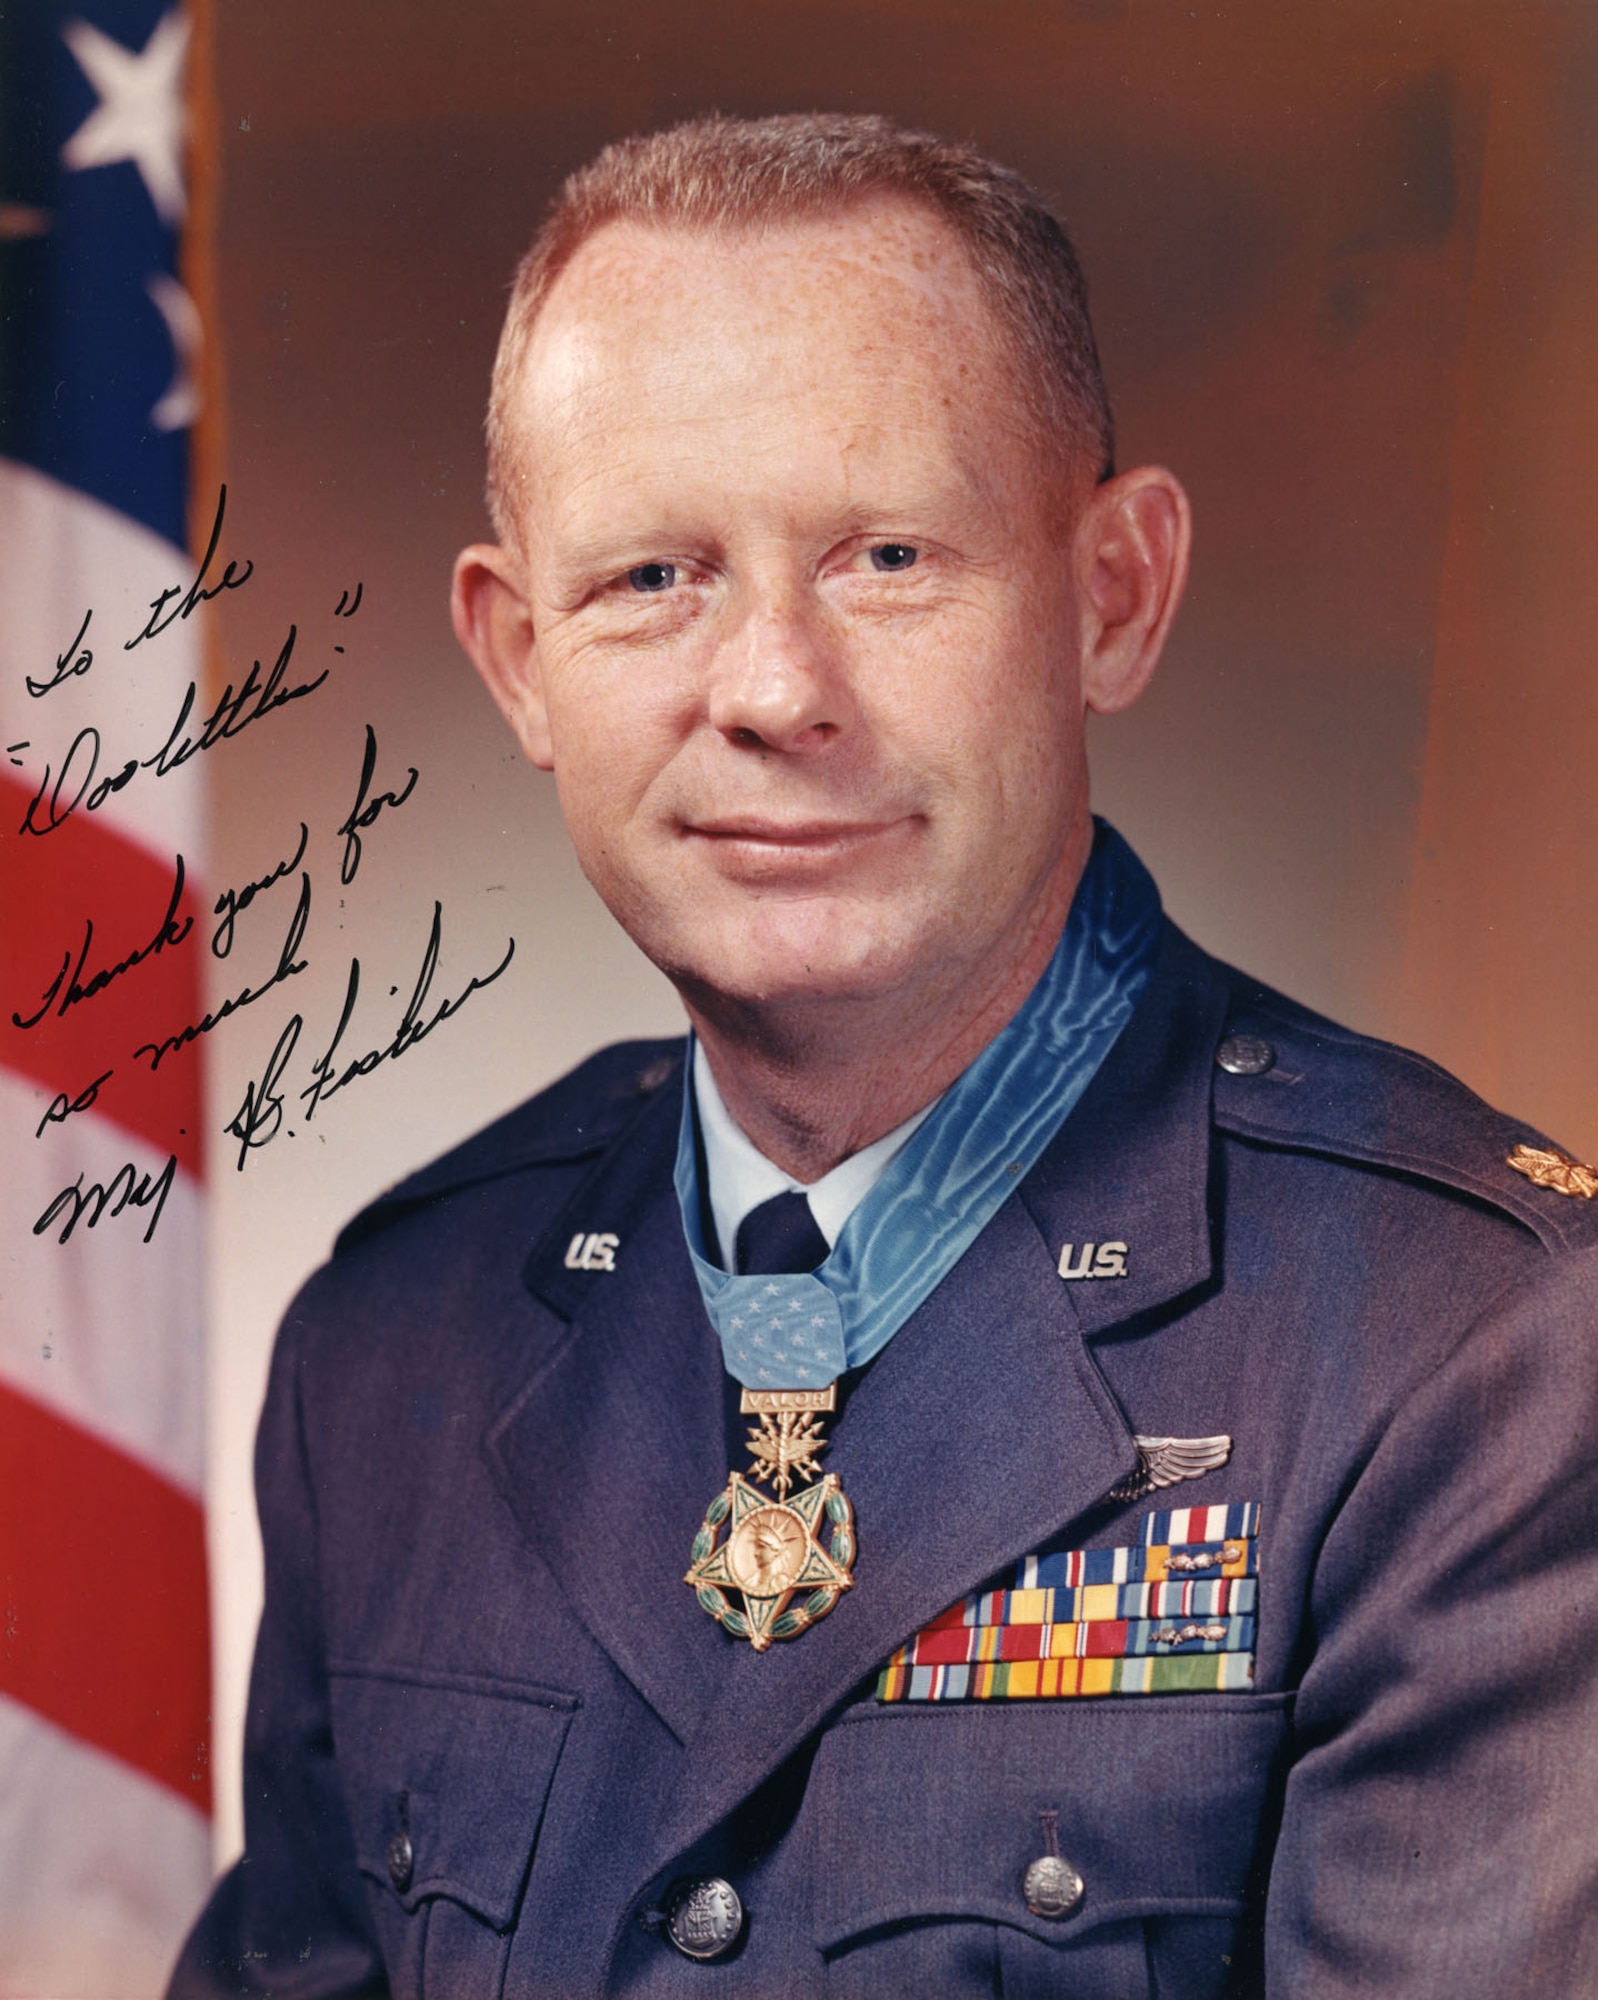 Official photograph autographed by Maj. Fisher to Jimmy Doolittle: "To the Doolittles, thank you for so much. Maj. B. Fisher." (U.S. Air Force photo)